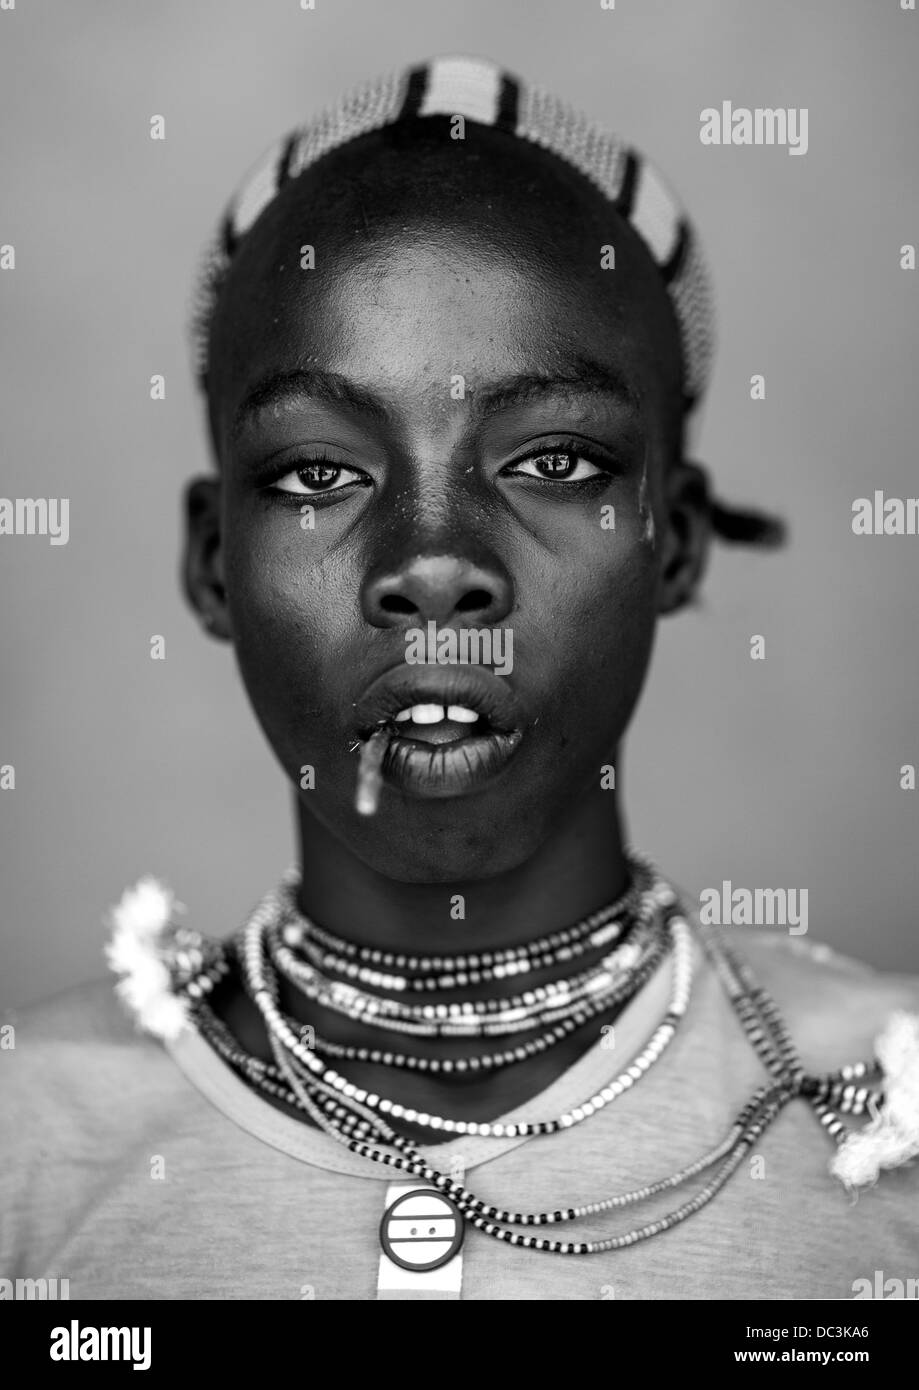 Hamer Young Man With A Stick In His Mouth, Dimeka, Omo Valley, Ethiopia Stock Photo